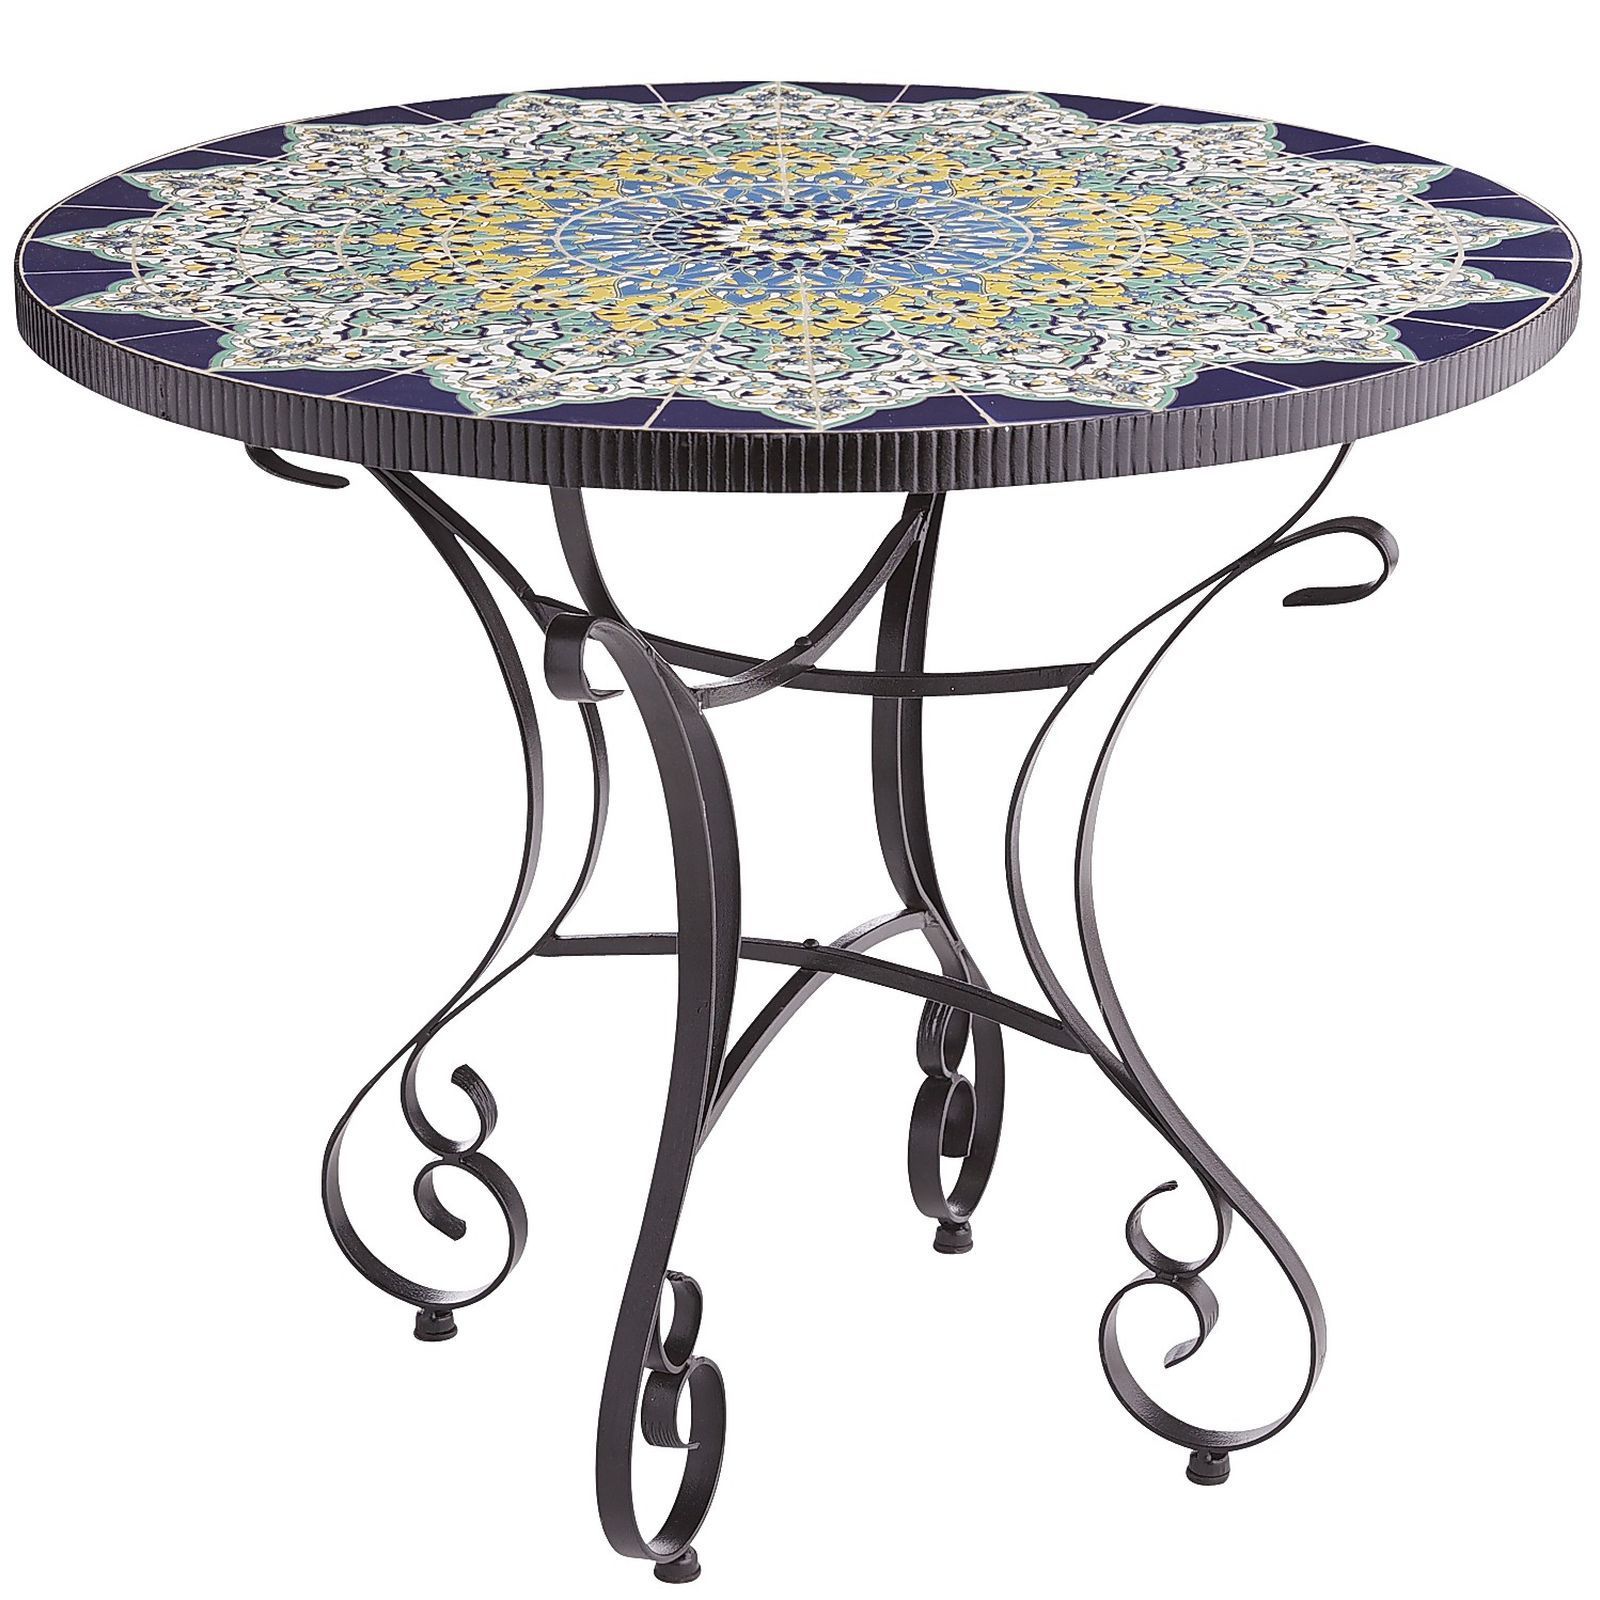 Mediterranean Square Table – Blue | Outdoor Accent Table, Mosaic Patio Within Blue Mosaic Black Iron Outdoor Accent Tables (View 10 of 15)